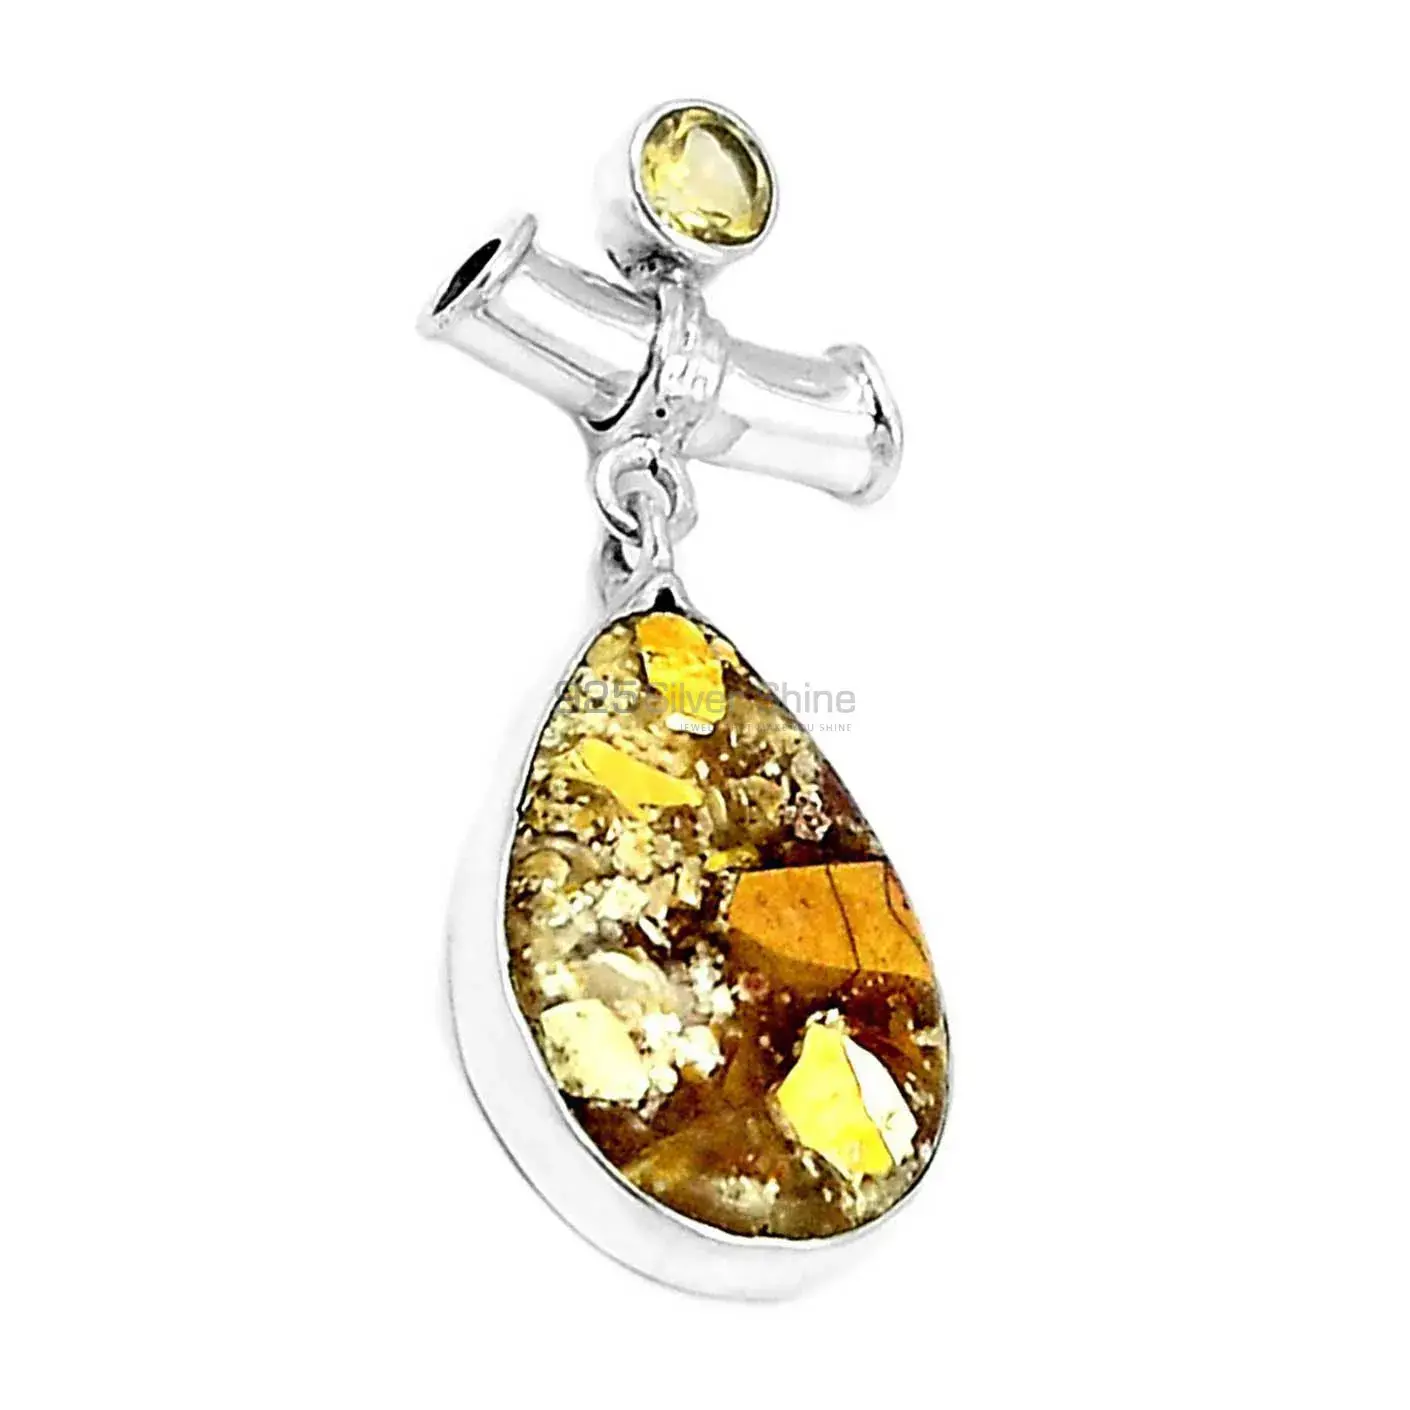 Top Quality Brecciated Mookaite Gemstone Pendants Wholesaler In Fine Sterling Silver Jewelry 925SP173_1